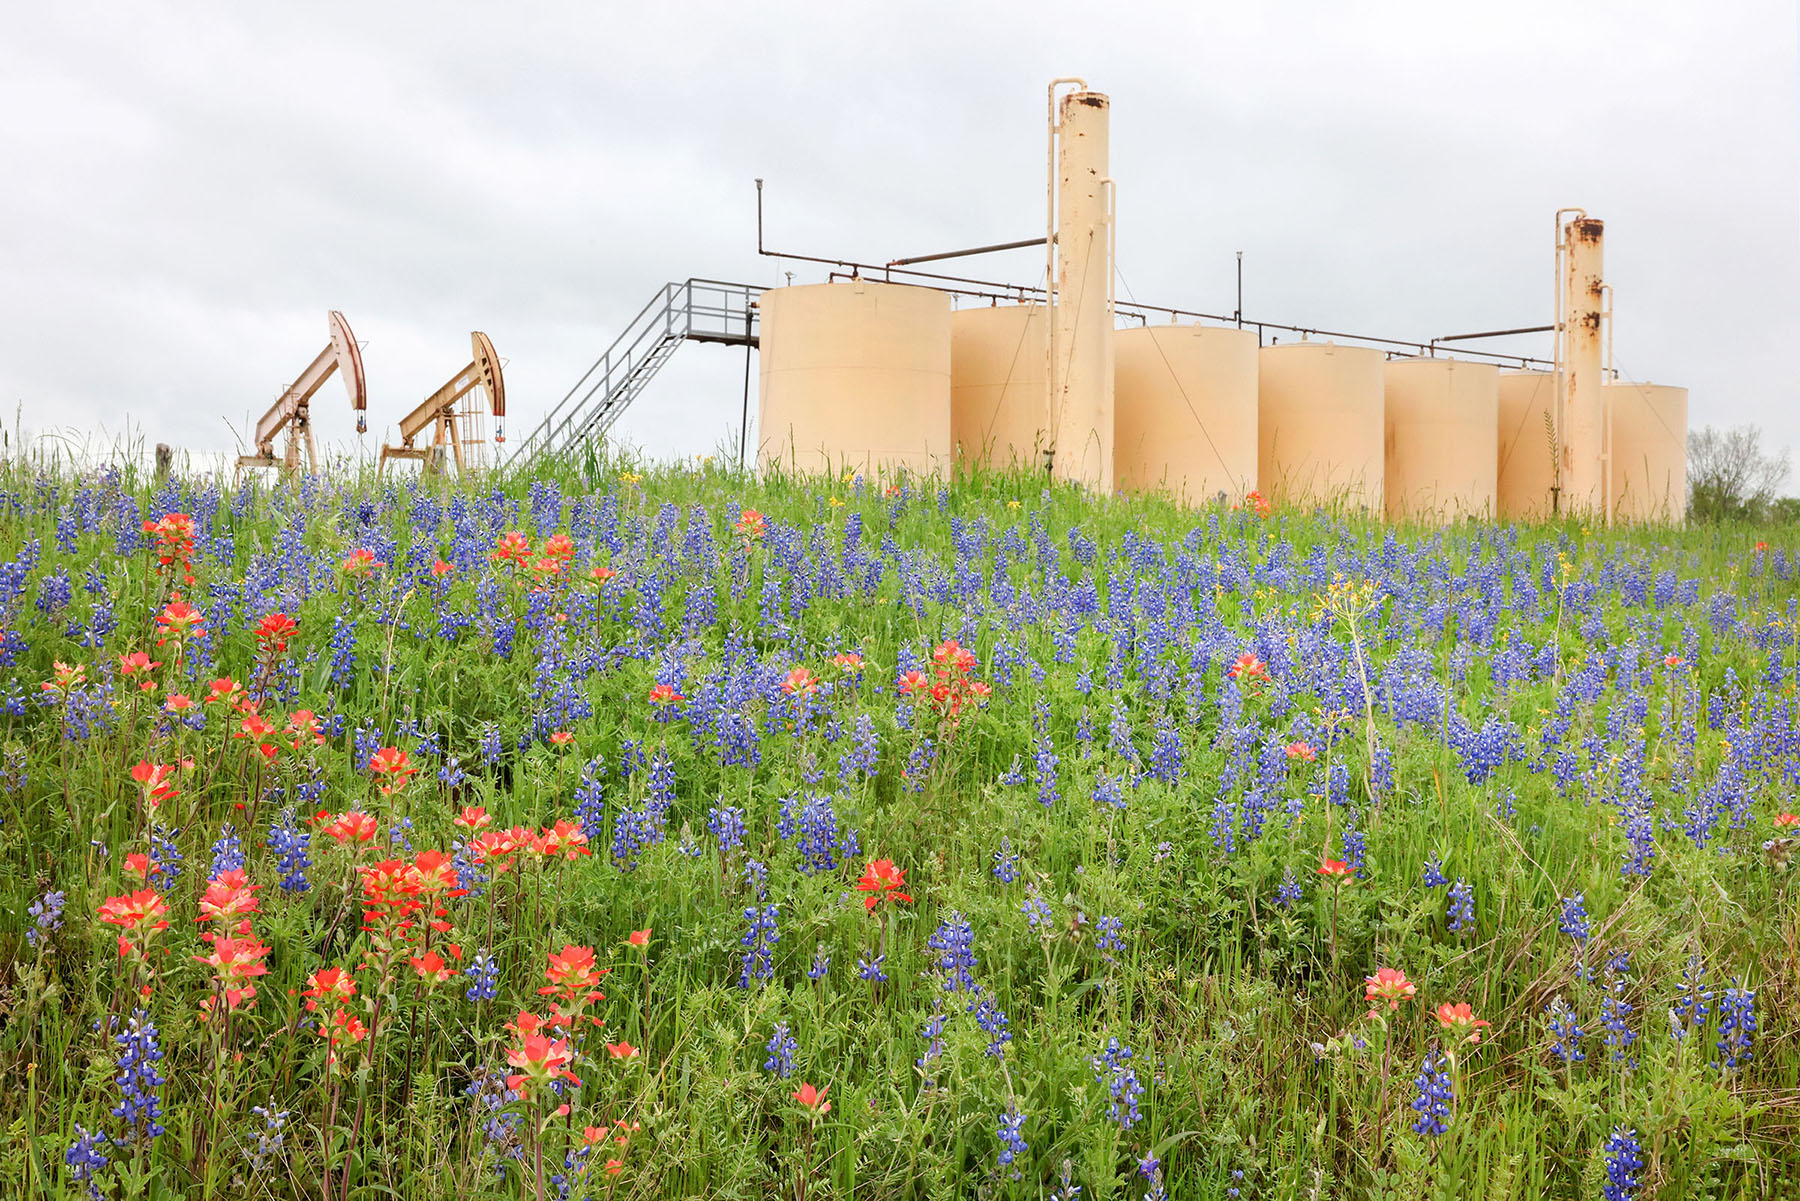 A pair of oil derricks next to holding tanks and a field of bright wildflowers